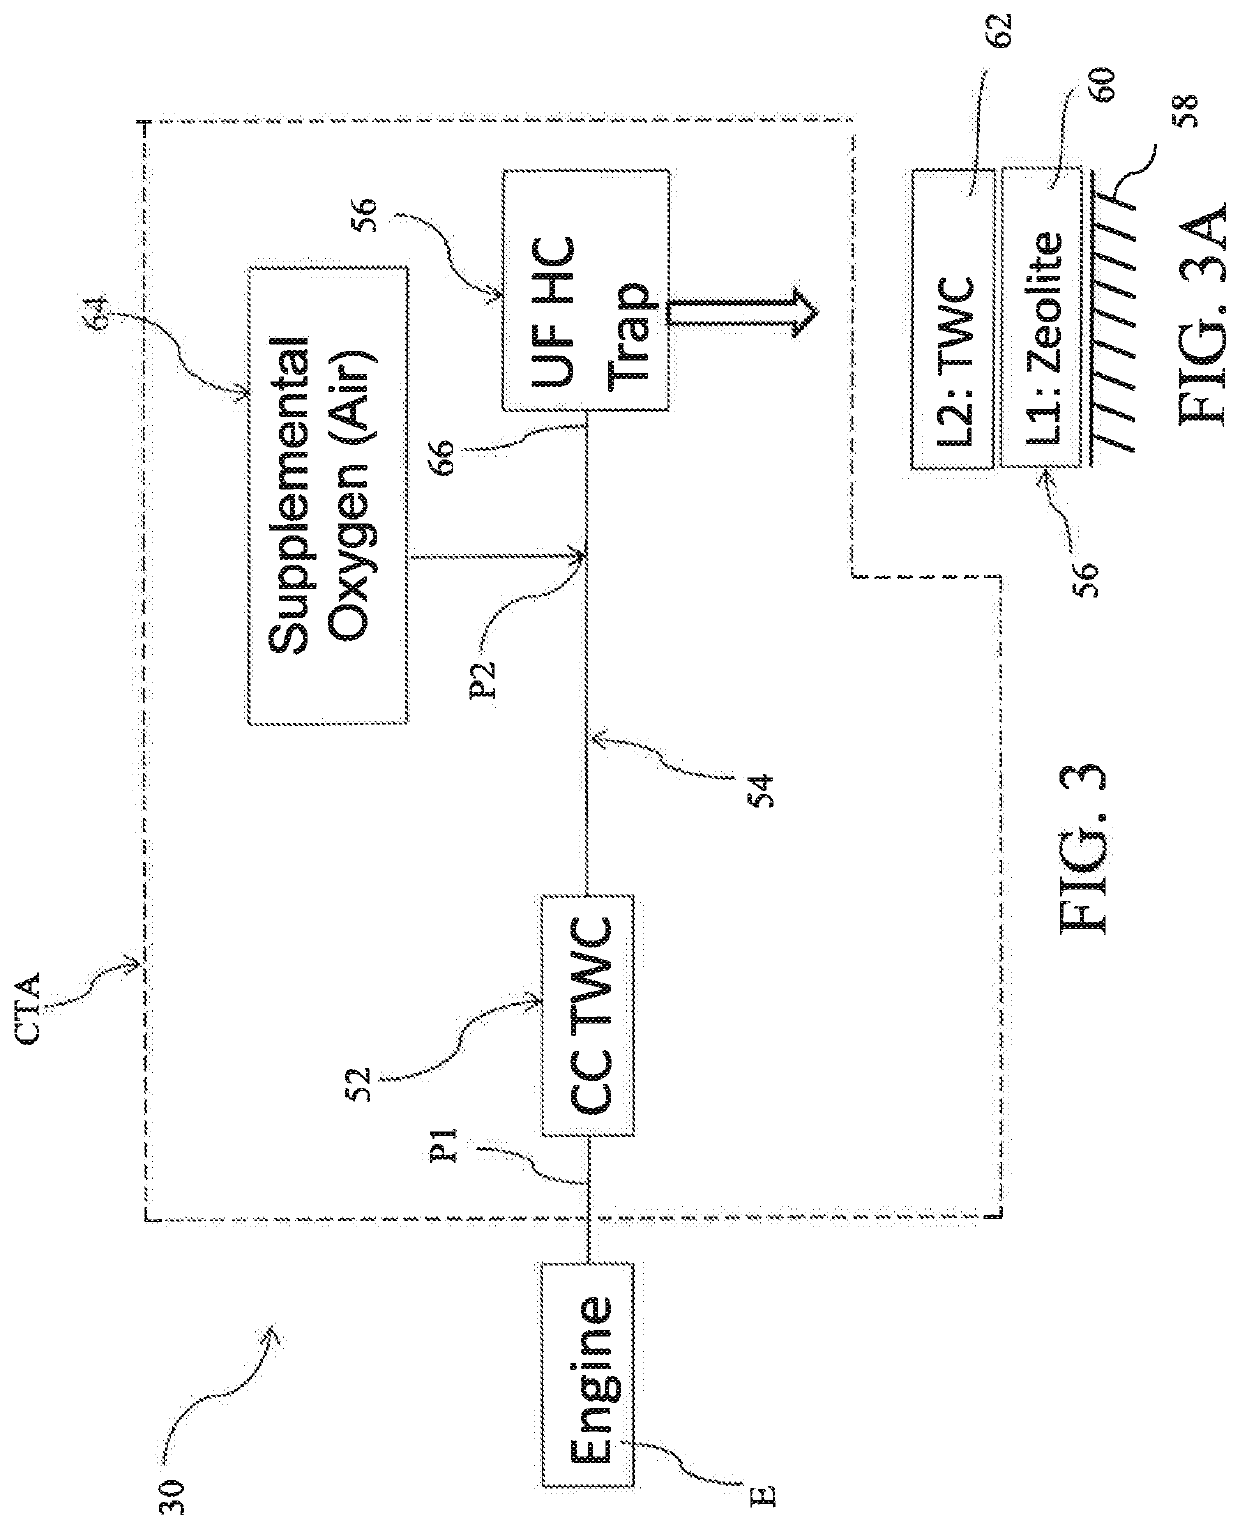 Exhaust treatment systems and methods involving oxygen supplementation and hydrocarbon trapping